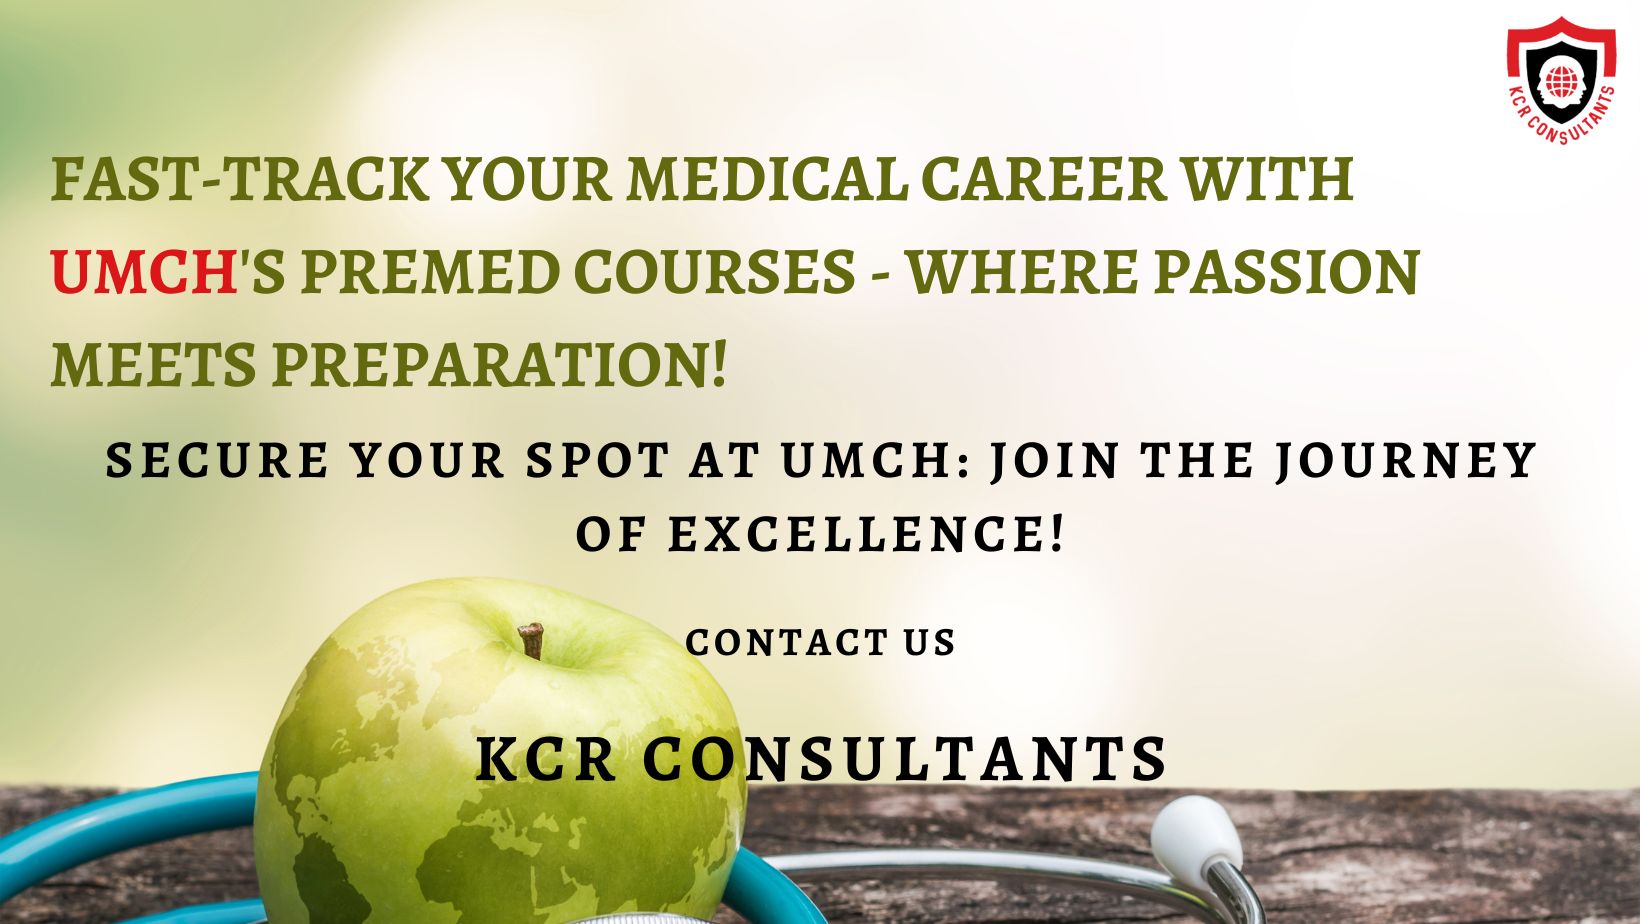 Pre-med Courses in Germany - KCR CONSULTANTS - Contact us